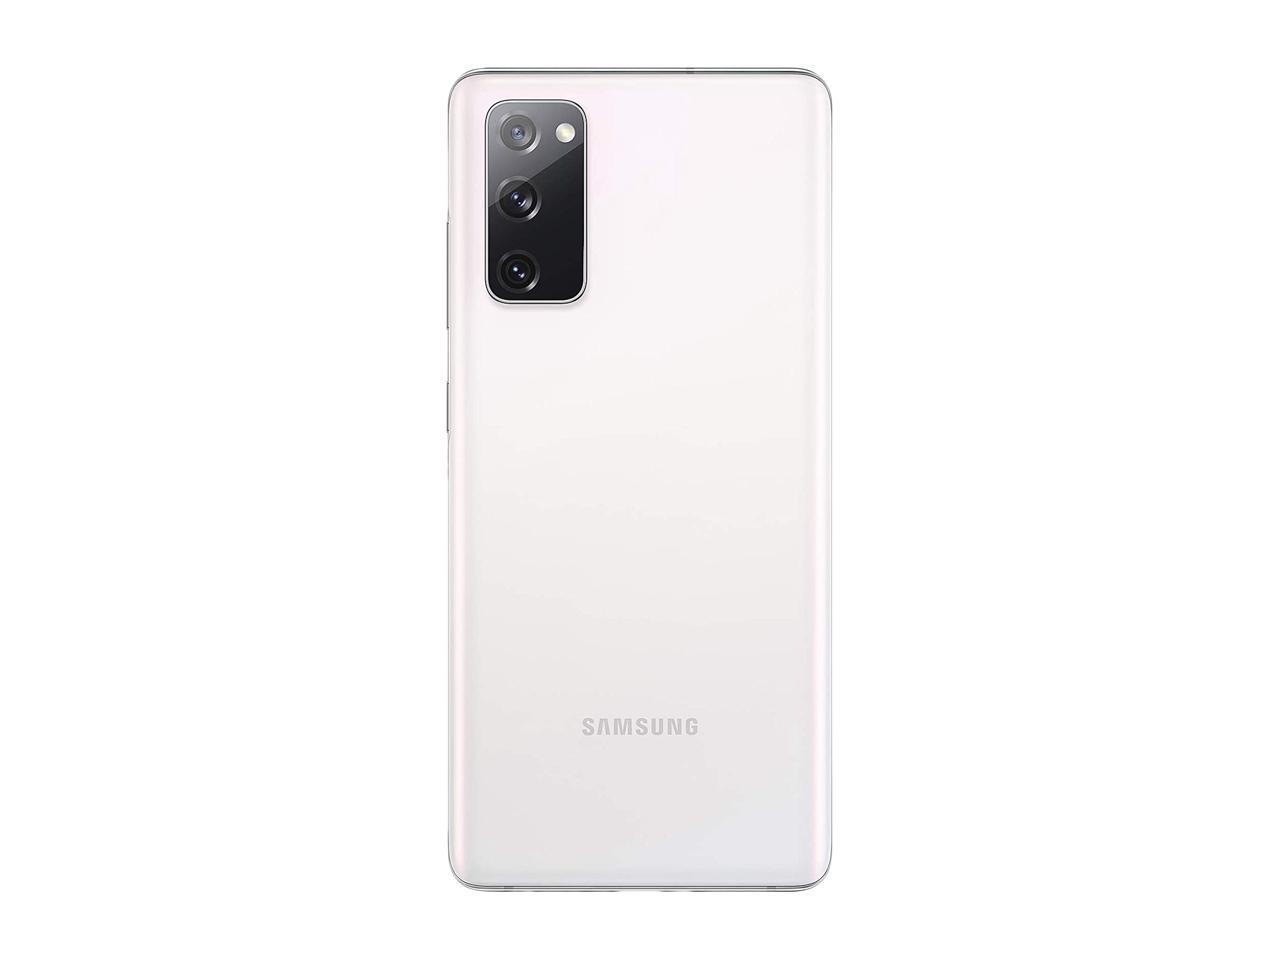 Samsung Galaxy S Fe 5g Factory Unlocked Android Cell Phone 128 Gb Us Version Smartphone Pro Grade Camera 30x Space Zoom Night Mode Cloud White Newegg Com